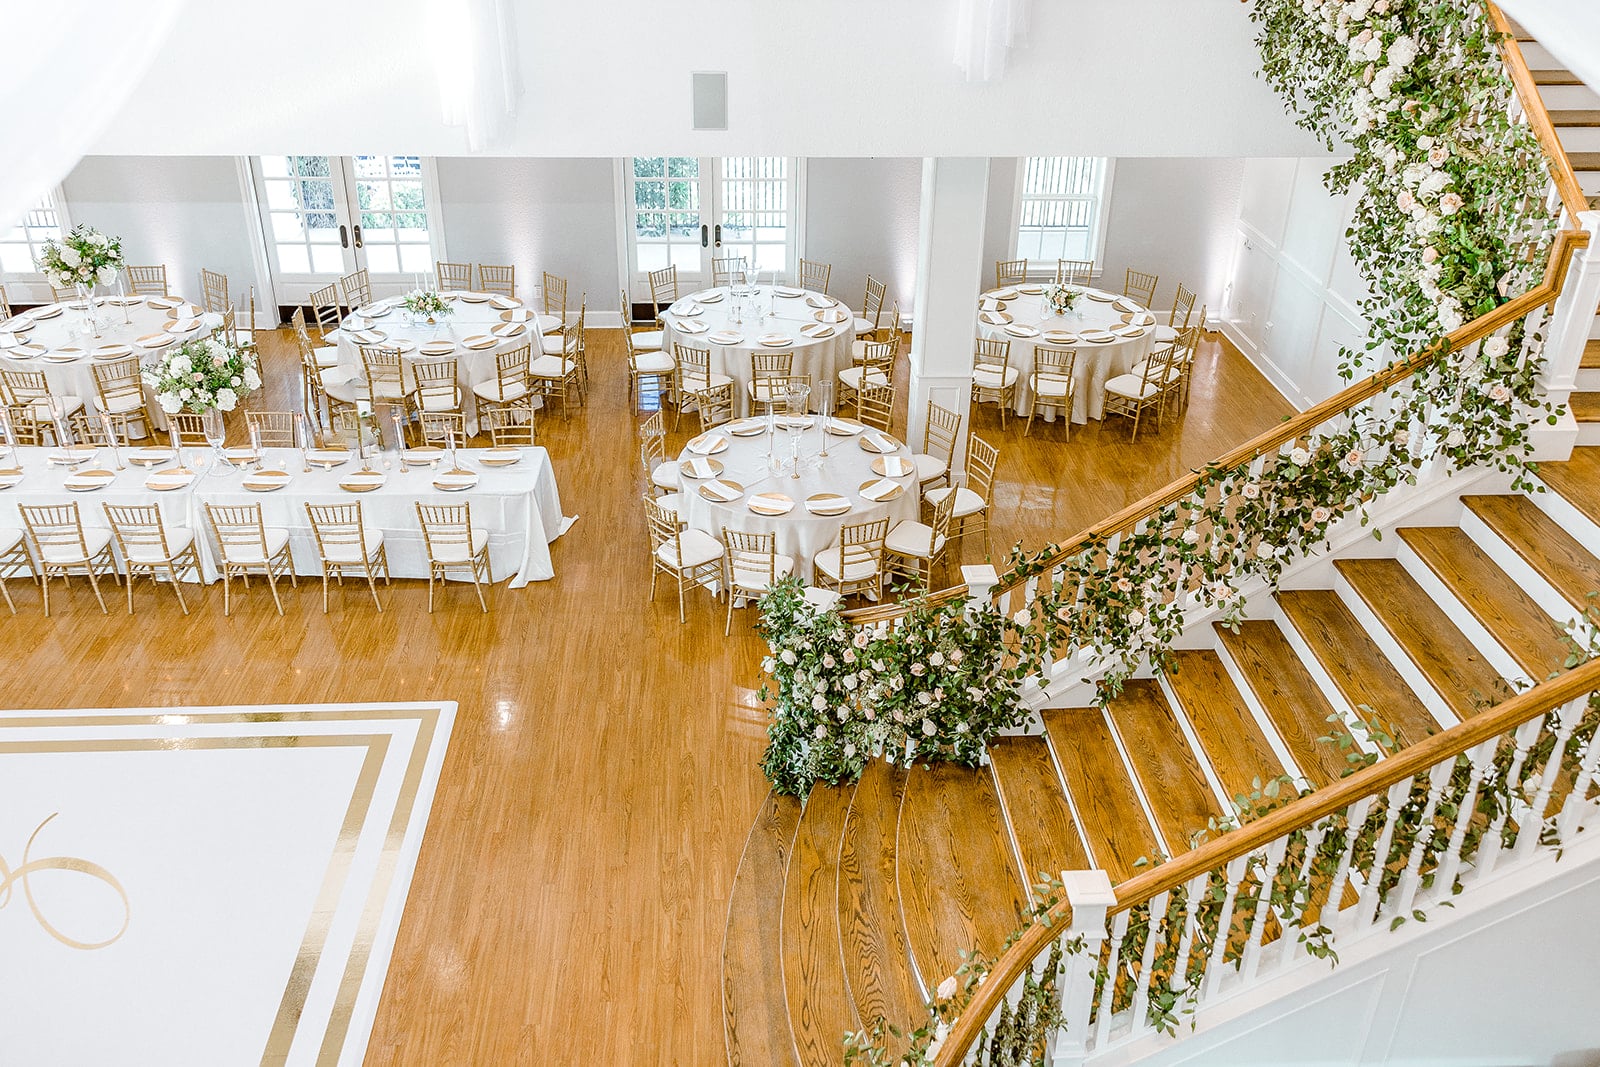 Kendall Point’s staircase decked with florals for wedding reception